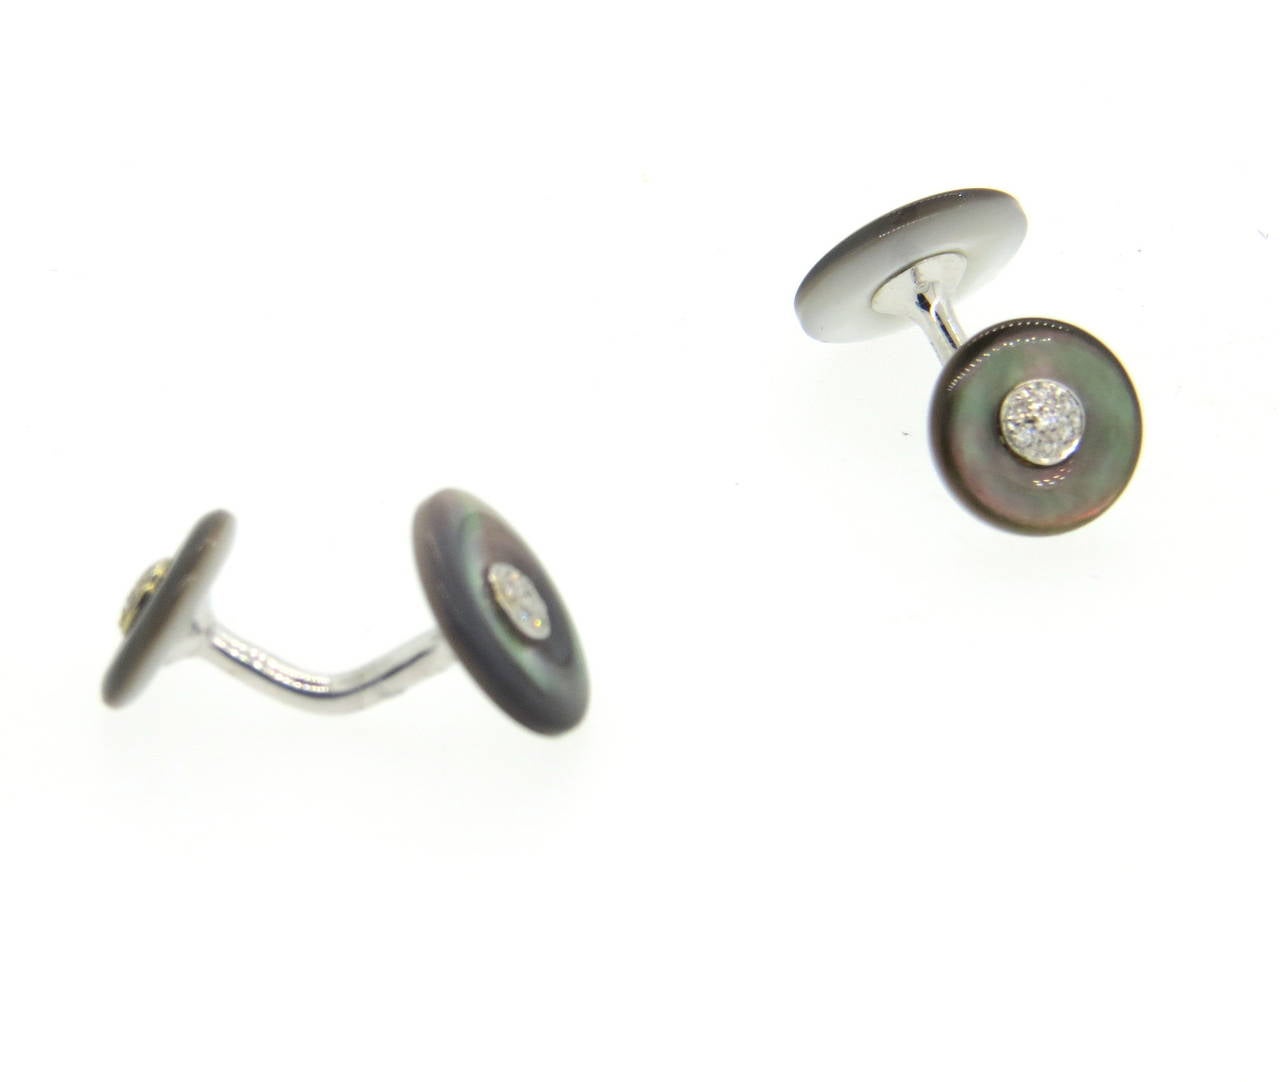 Pair of new 18k white gold cufflinks, crafted by Trianon, set with black mother of pearl top and diamonds in the center. Top of the cufflink measures 13mm in diameter, back - 11mm in diameter. Marked Trianon.  Weight - 5.3 grams
Retail $2000